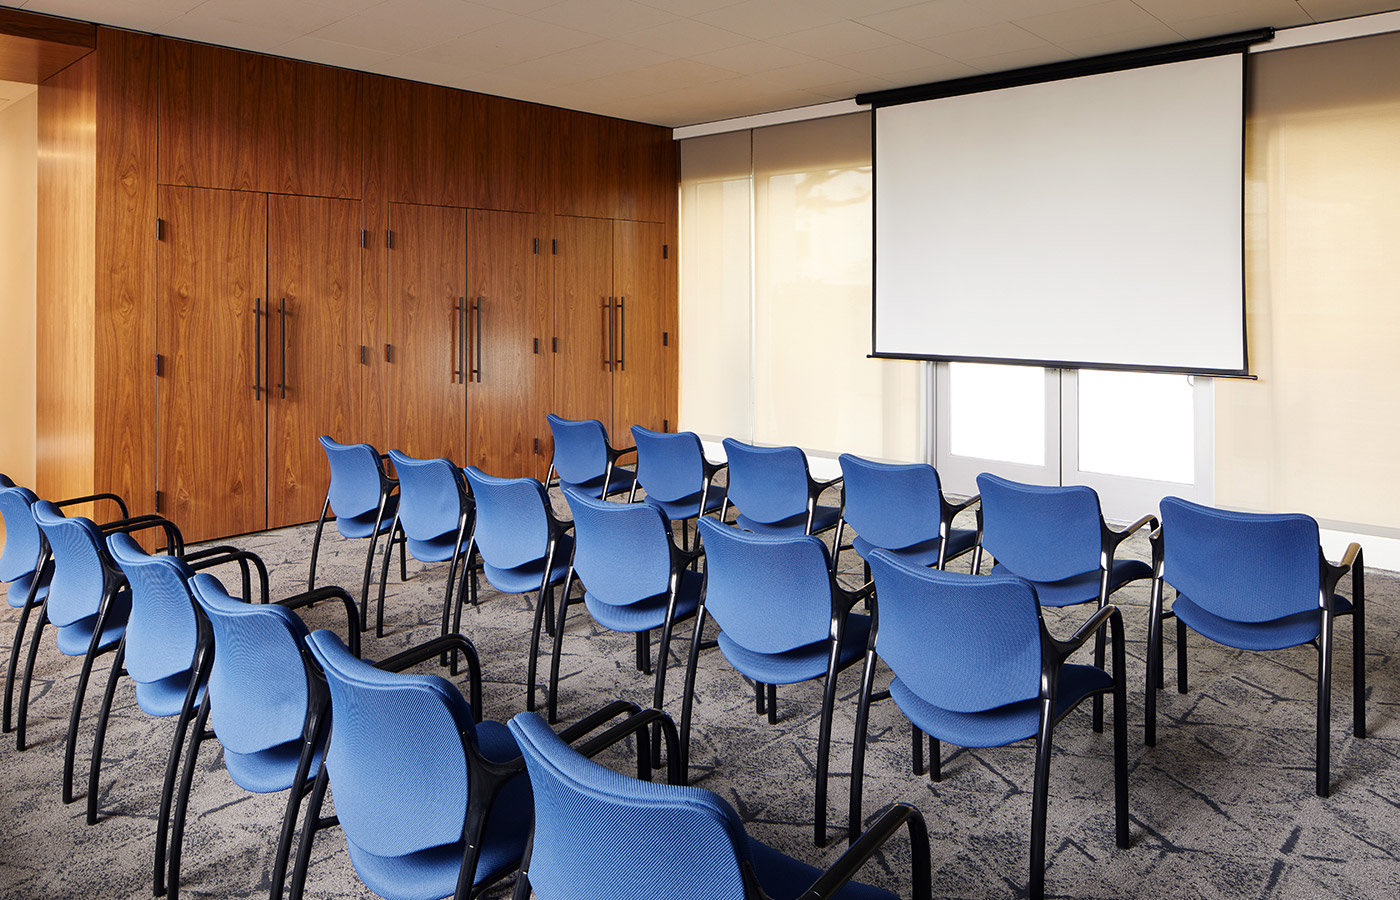 lined up seating facing projector screen